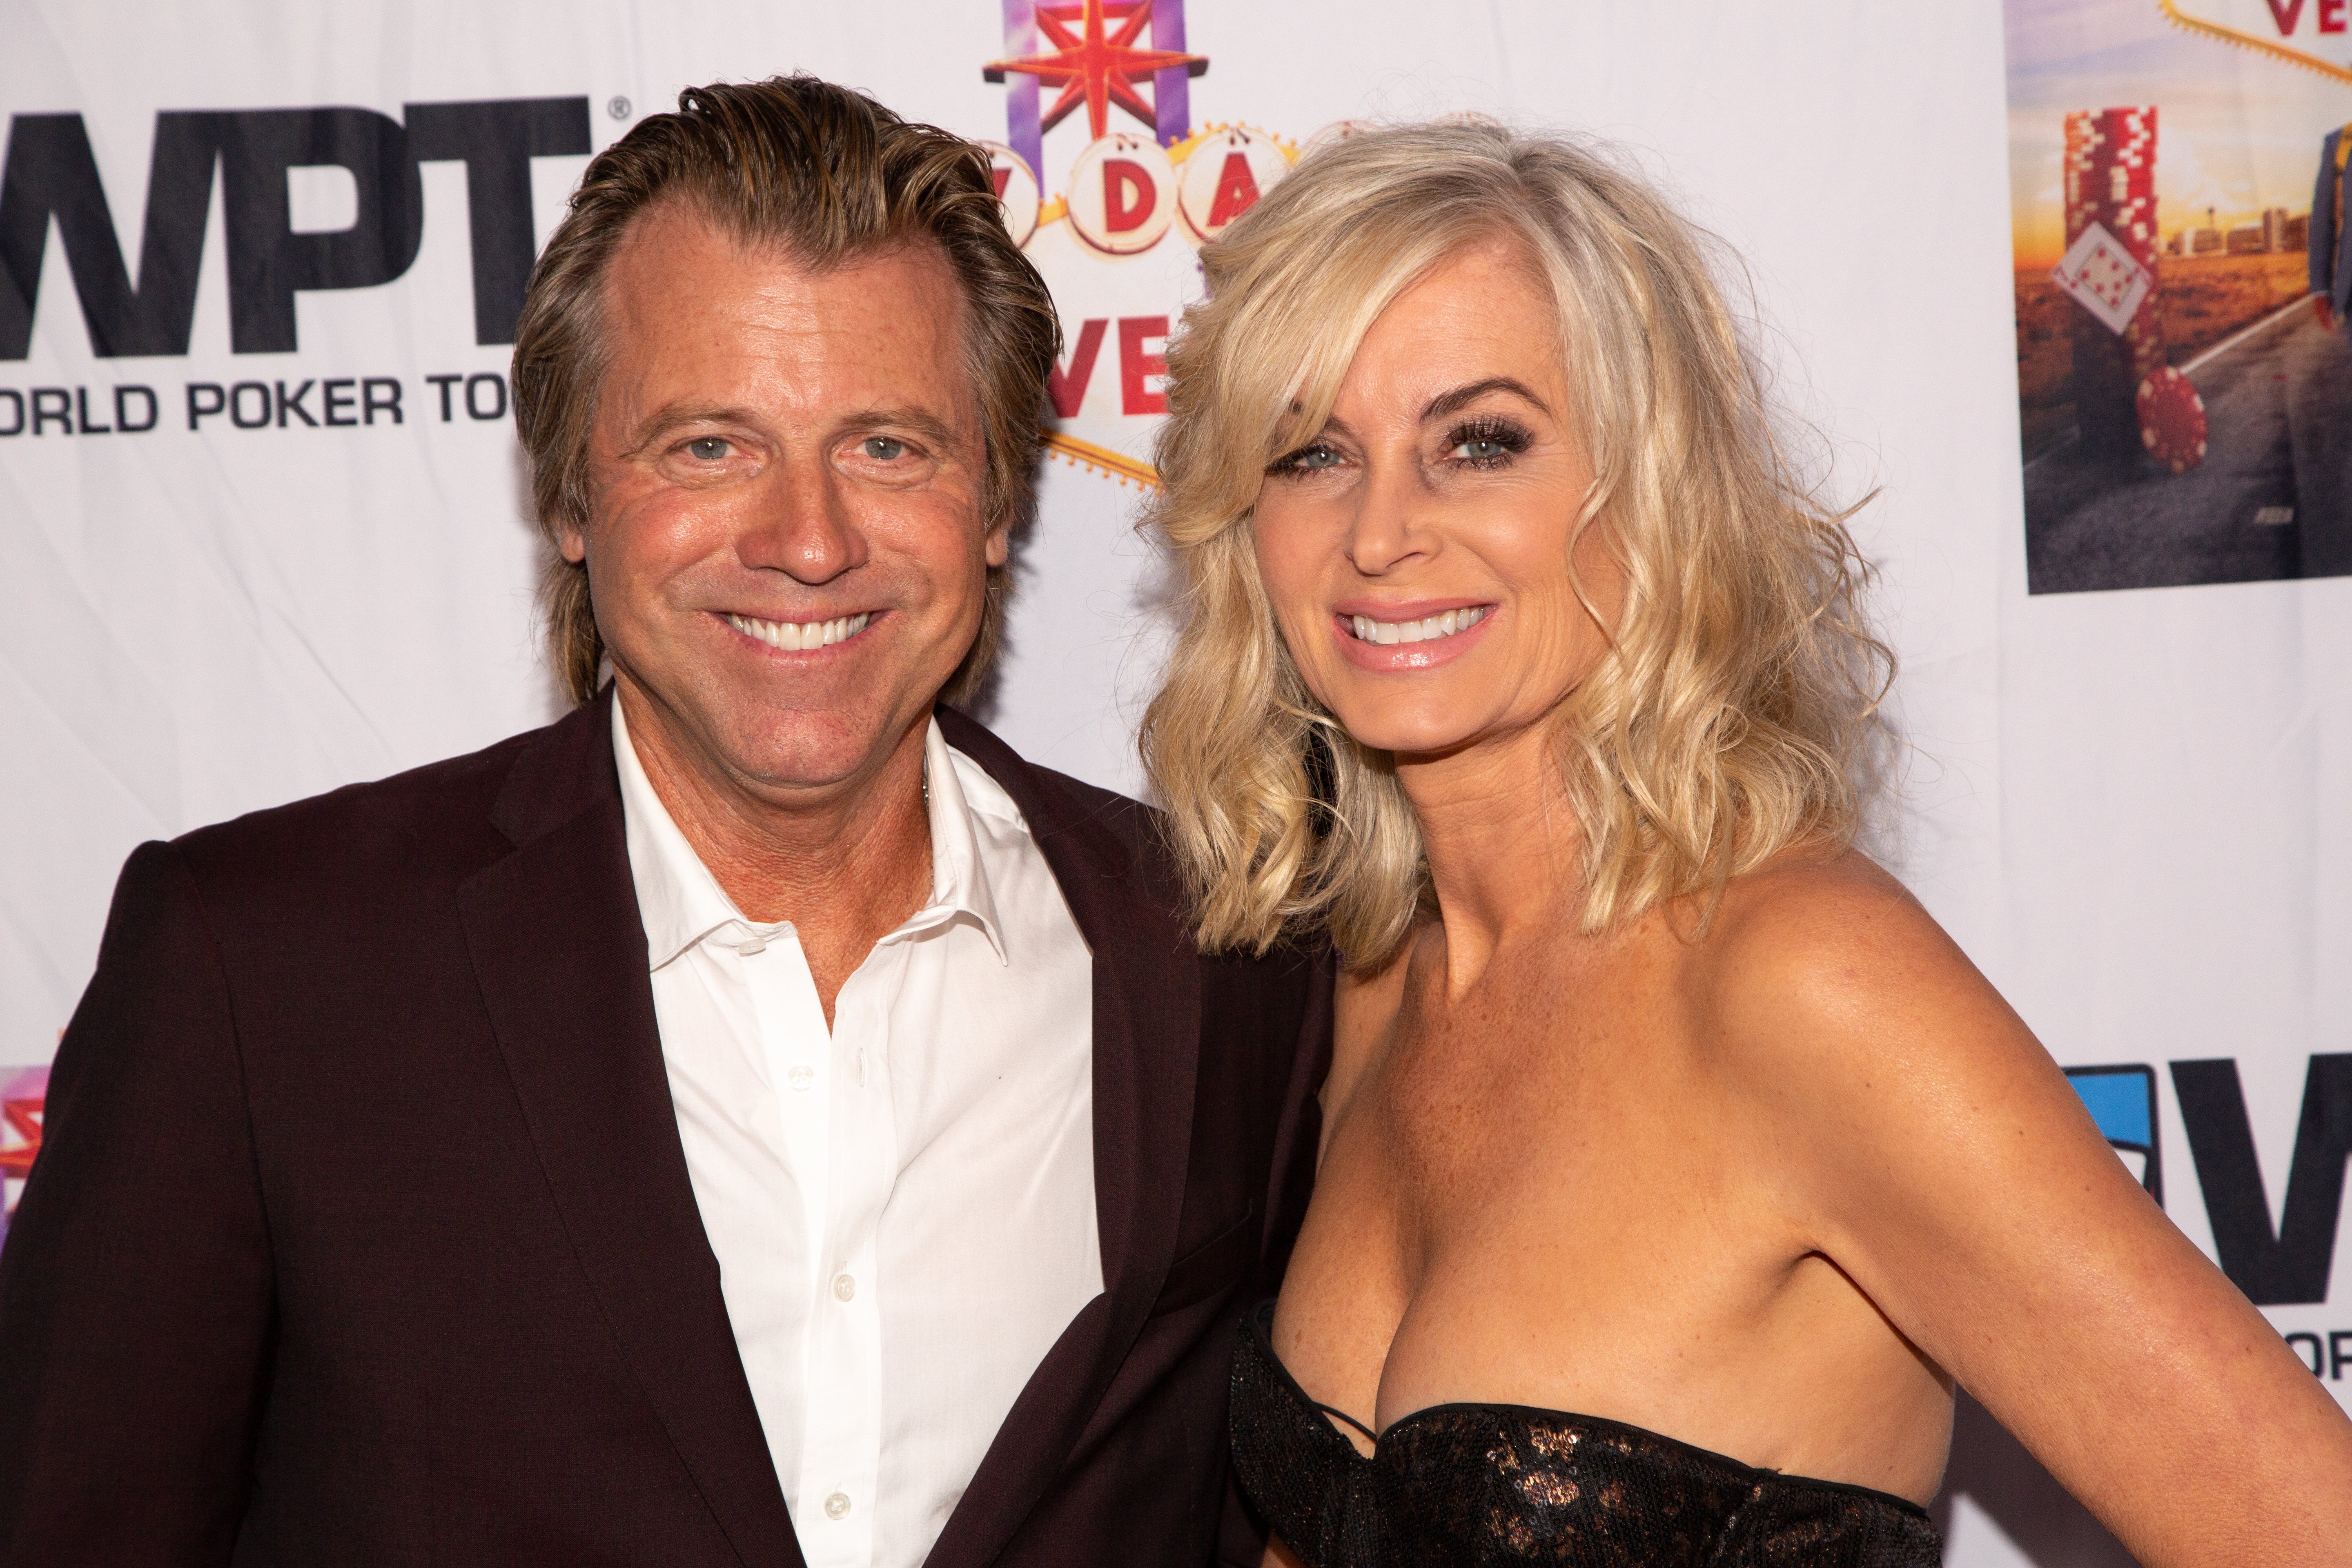 Vincent Van Patten and Eileen Davidson at the LA premiere of "7 Days To Vegas" on September 21, 2019 in Beverly Hills. | Source: Getty Images